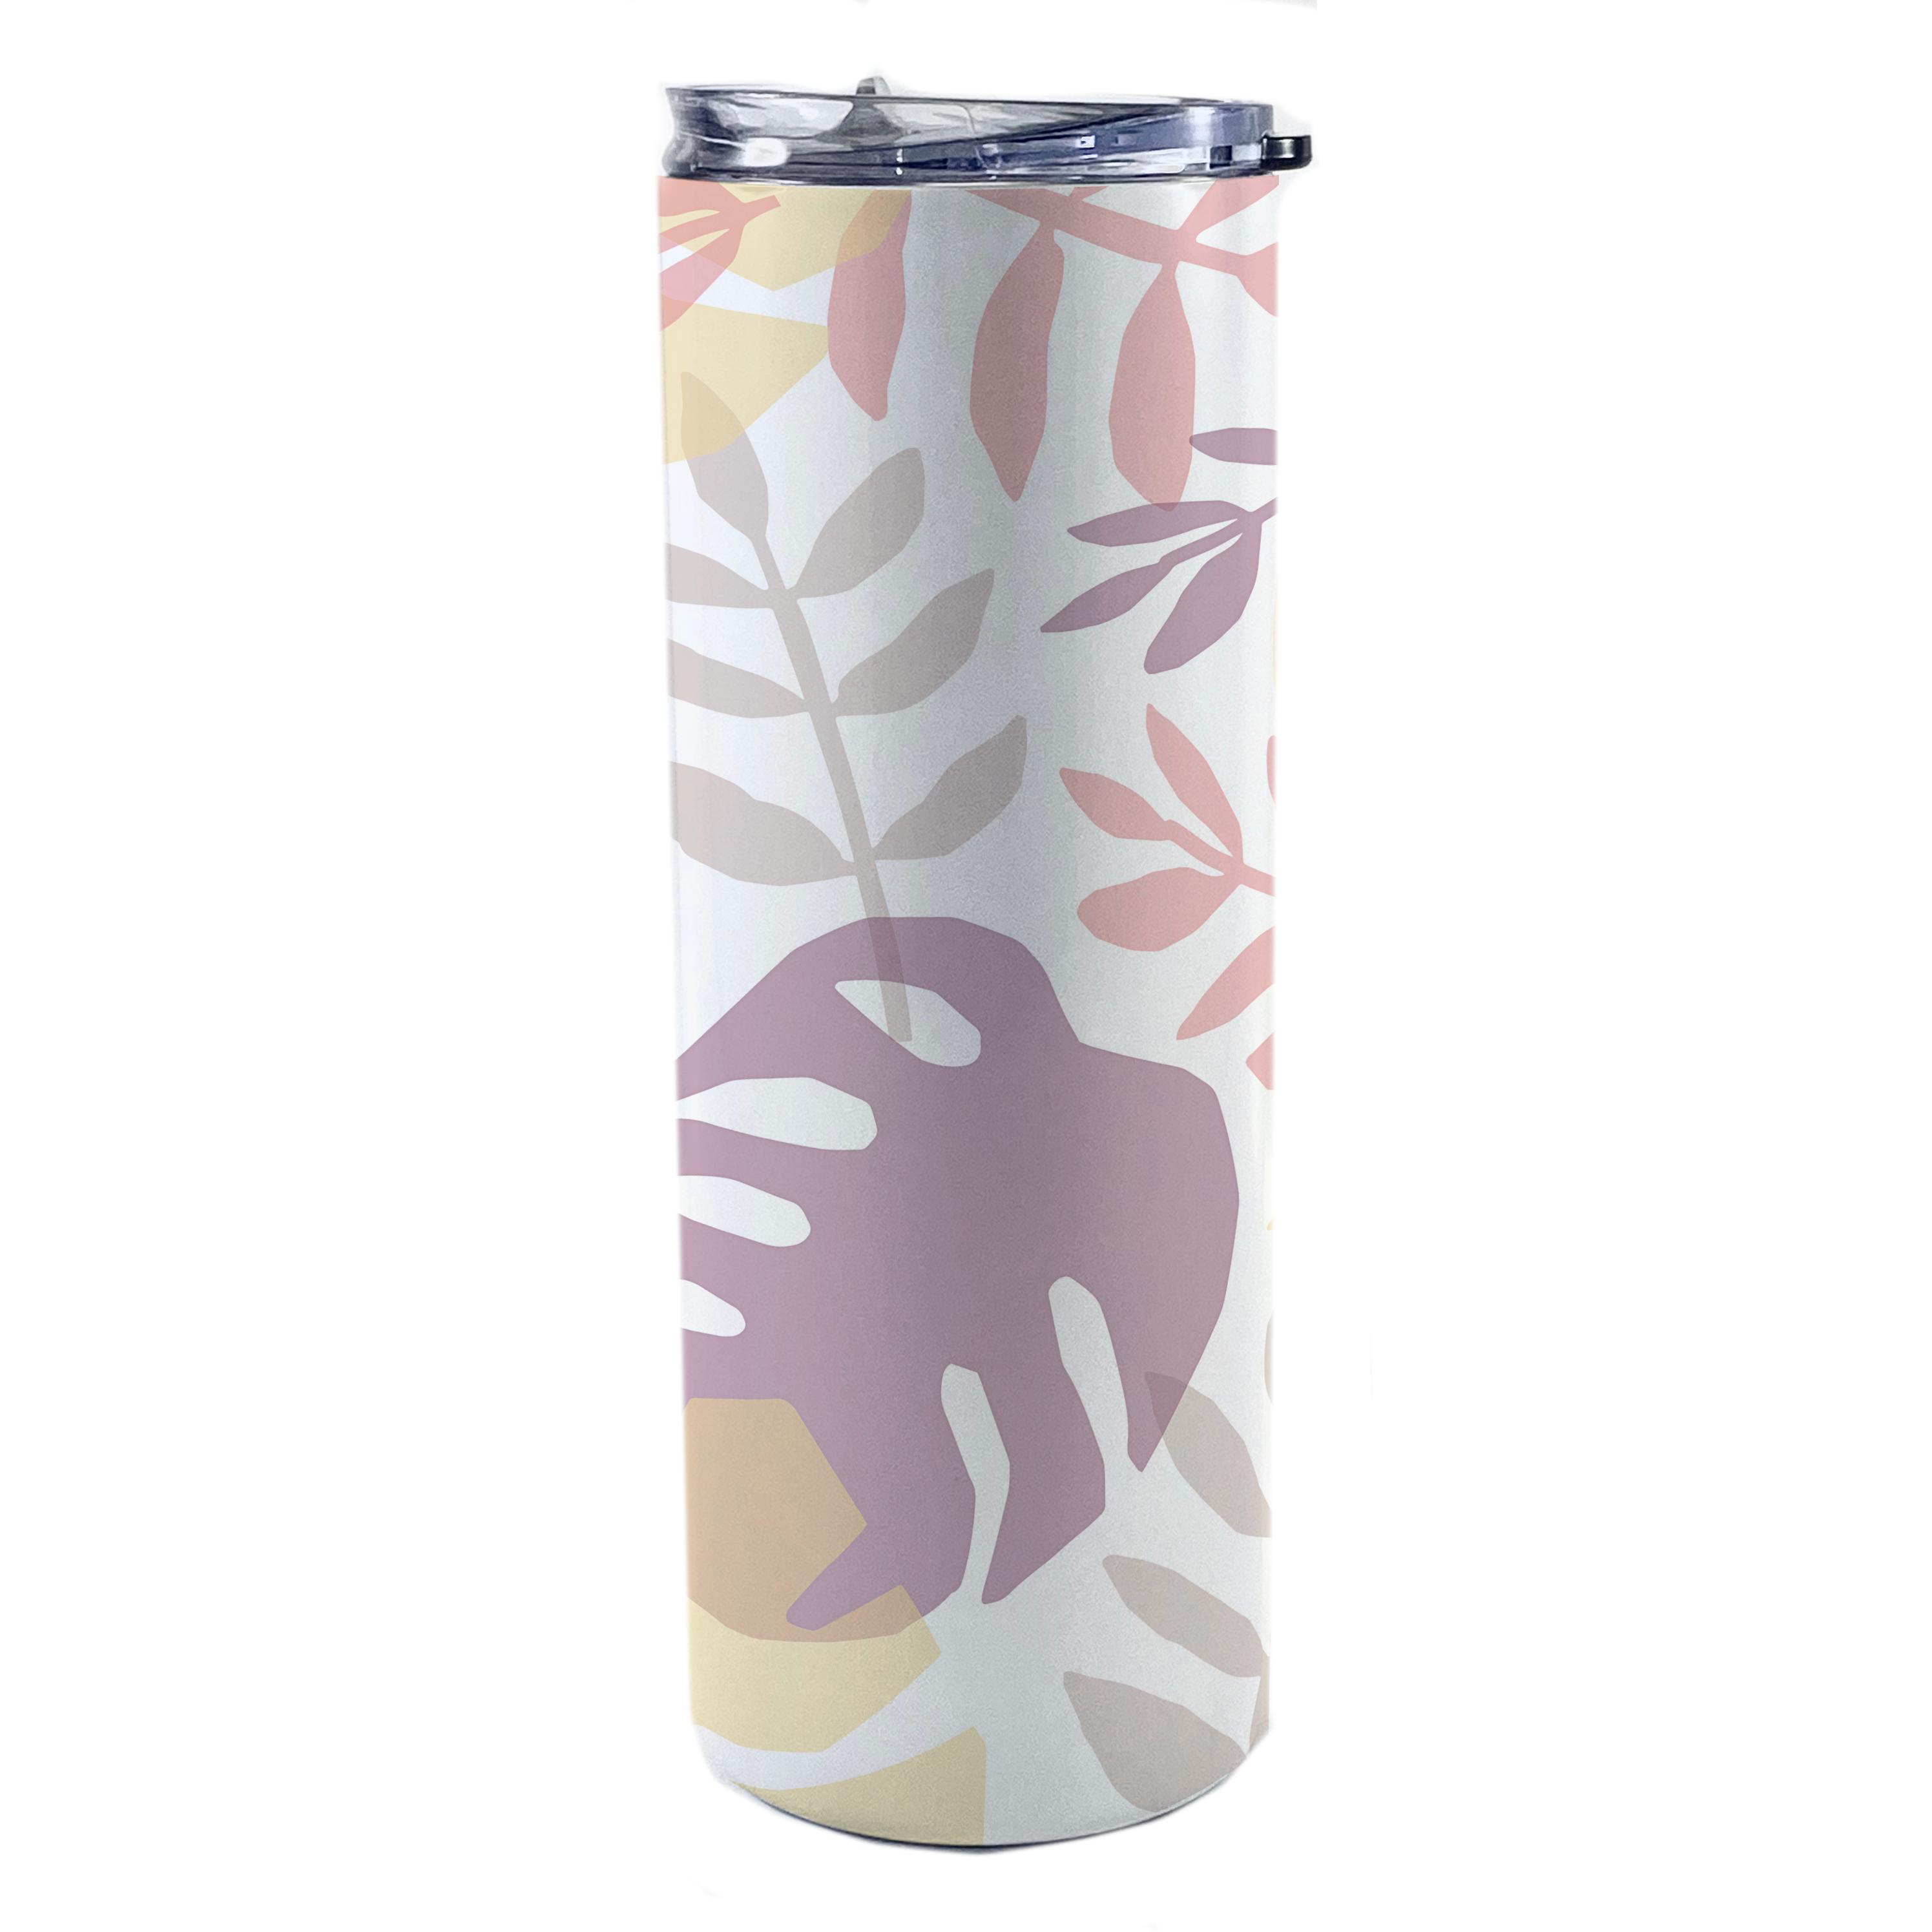 Trend Setters Originals (Pastel Palms) 20 Oz Stainless Steel Travel Tumbler with Straw